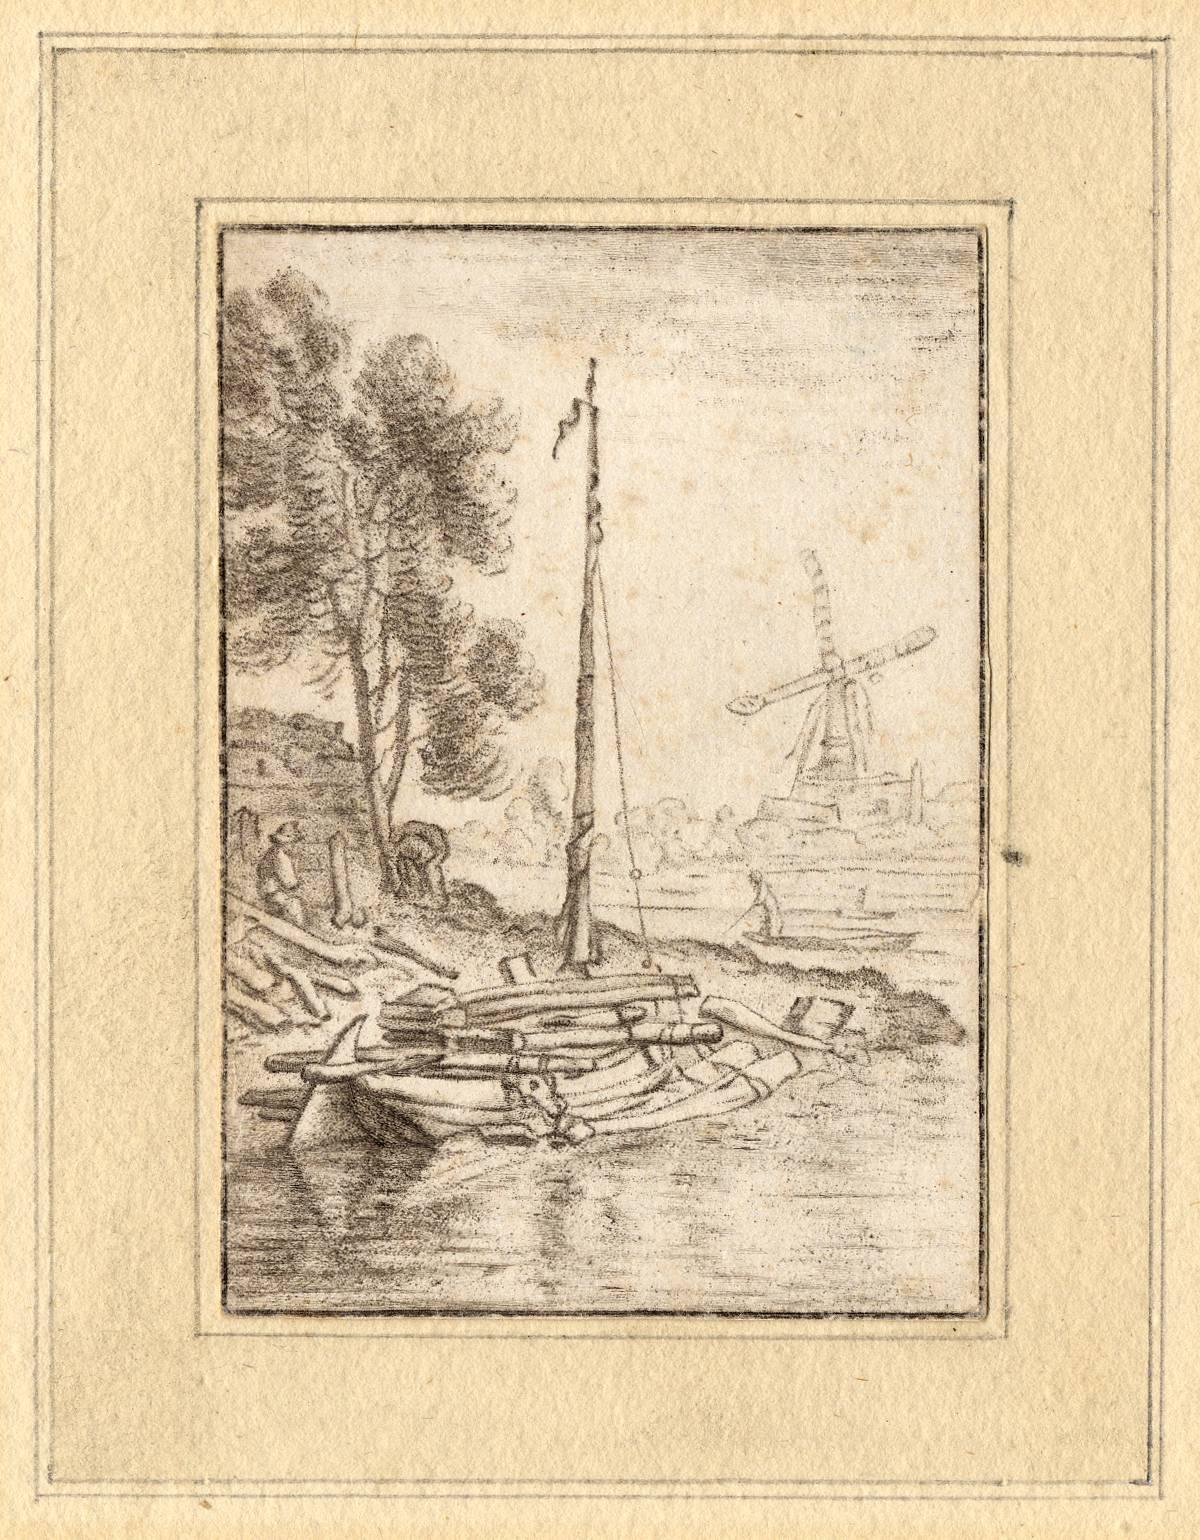 Set of 2 prints: A ship's wharf & A bend in the river with a ship. - Print by Cornelis Ploos van Amstel